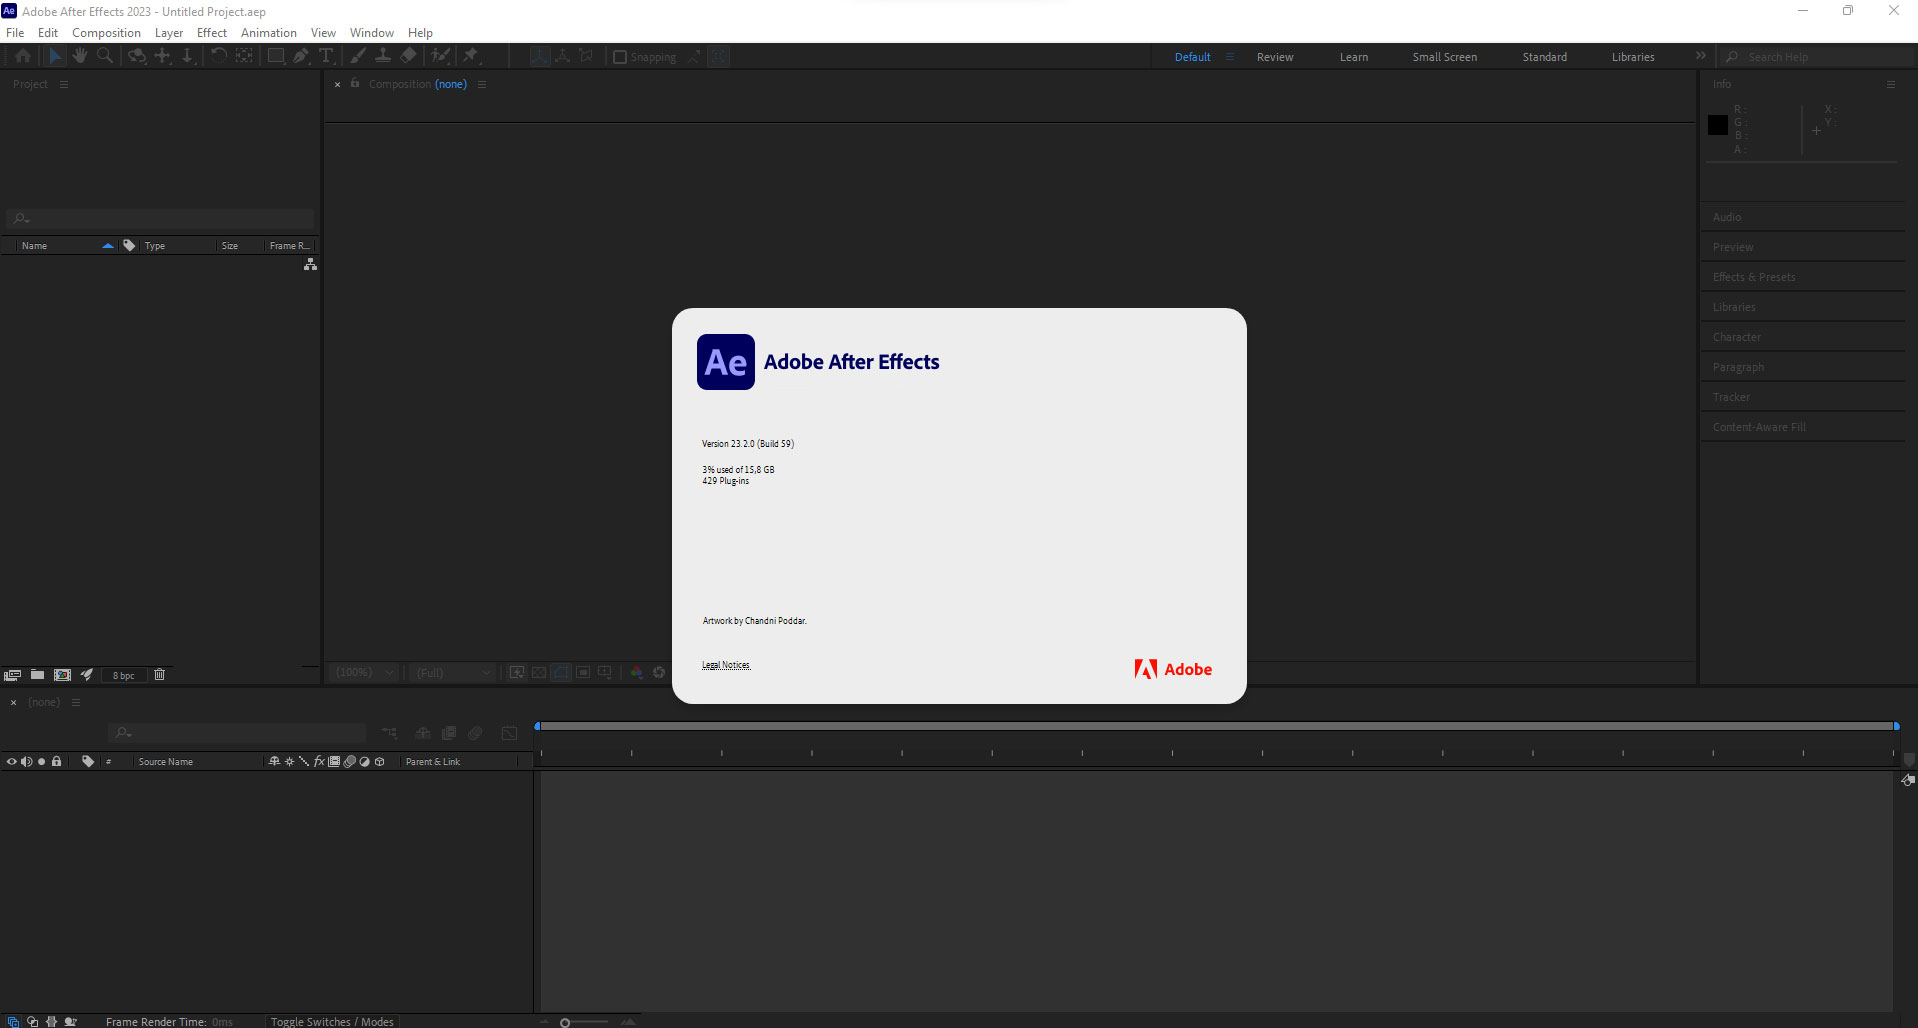 Working with Adobe After Effects 2023 v23.2.0.65 full